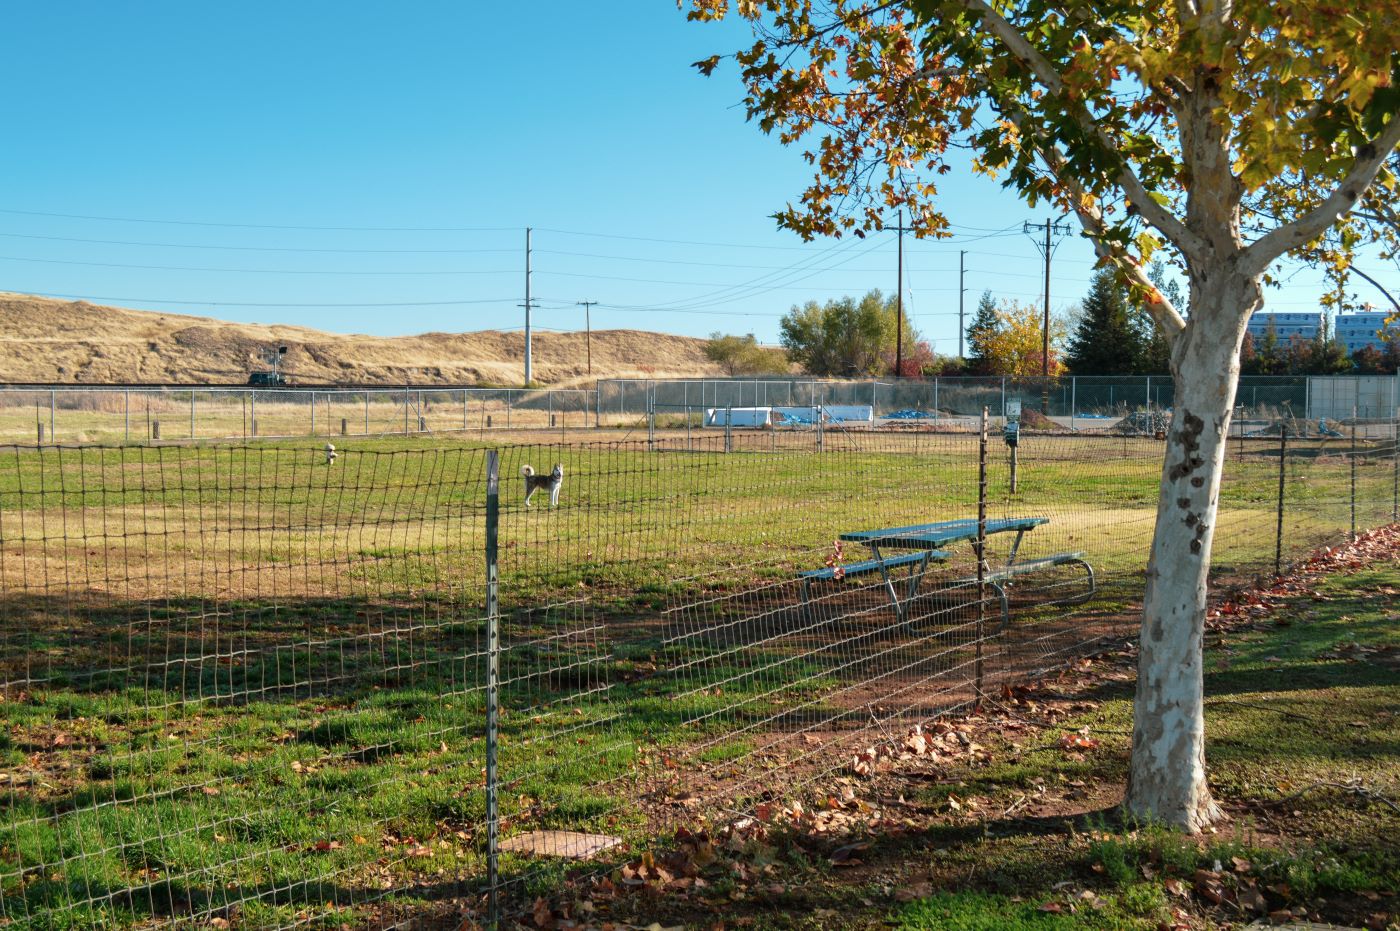 Dog park with an open space for activity